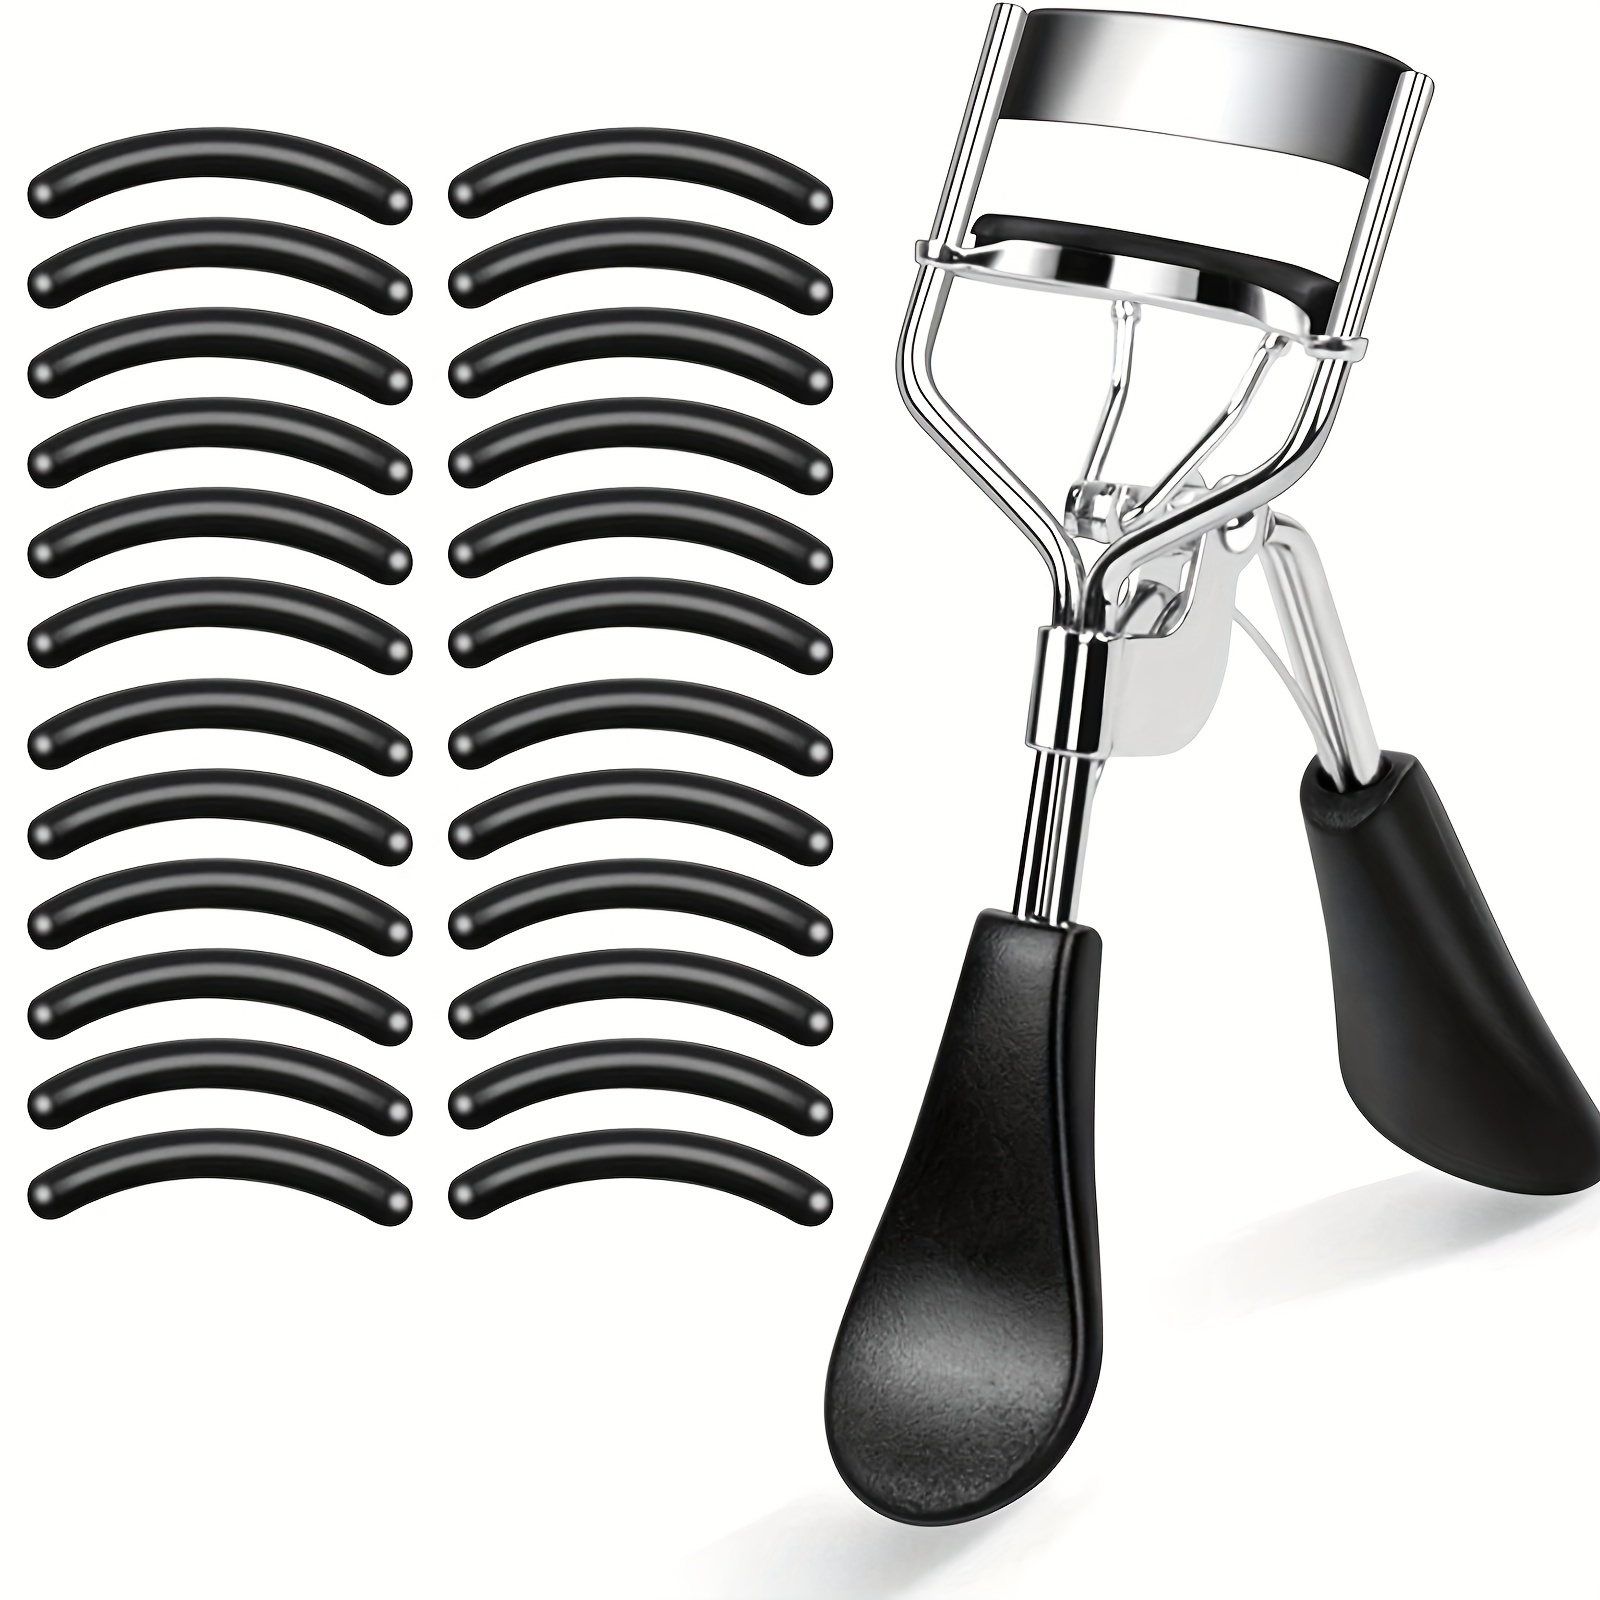 

Eyelash Curler, Lash Curler With 10 Extra Silicone Pads, Beauty Makeup Tool With Comfortable Handle Fits All Eye Shapes